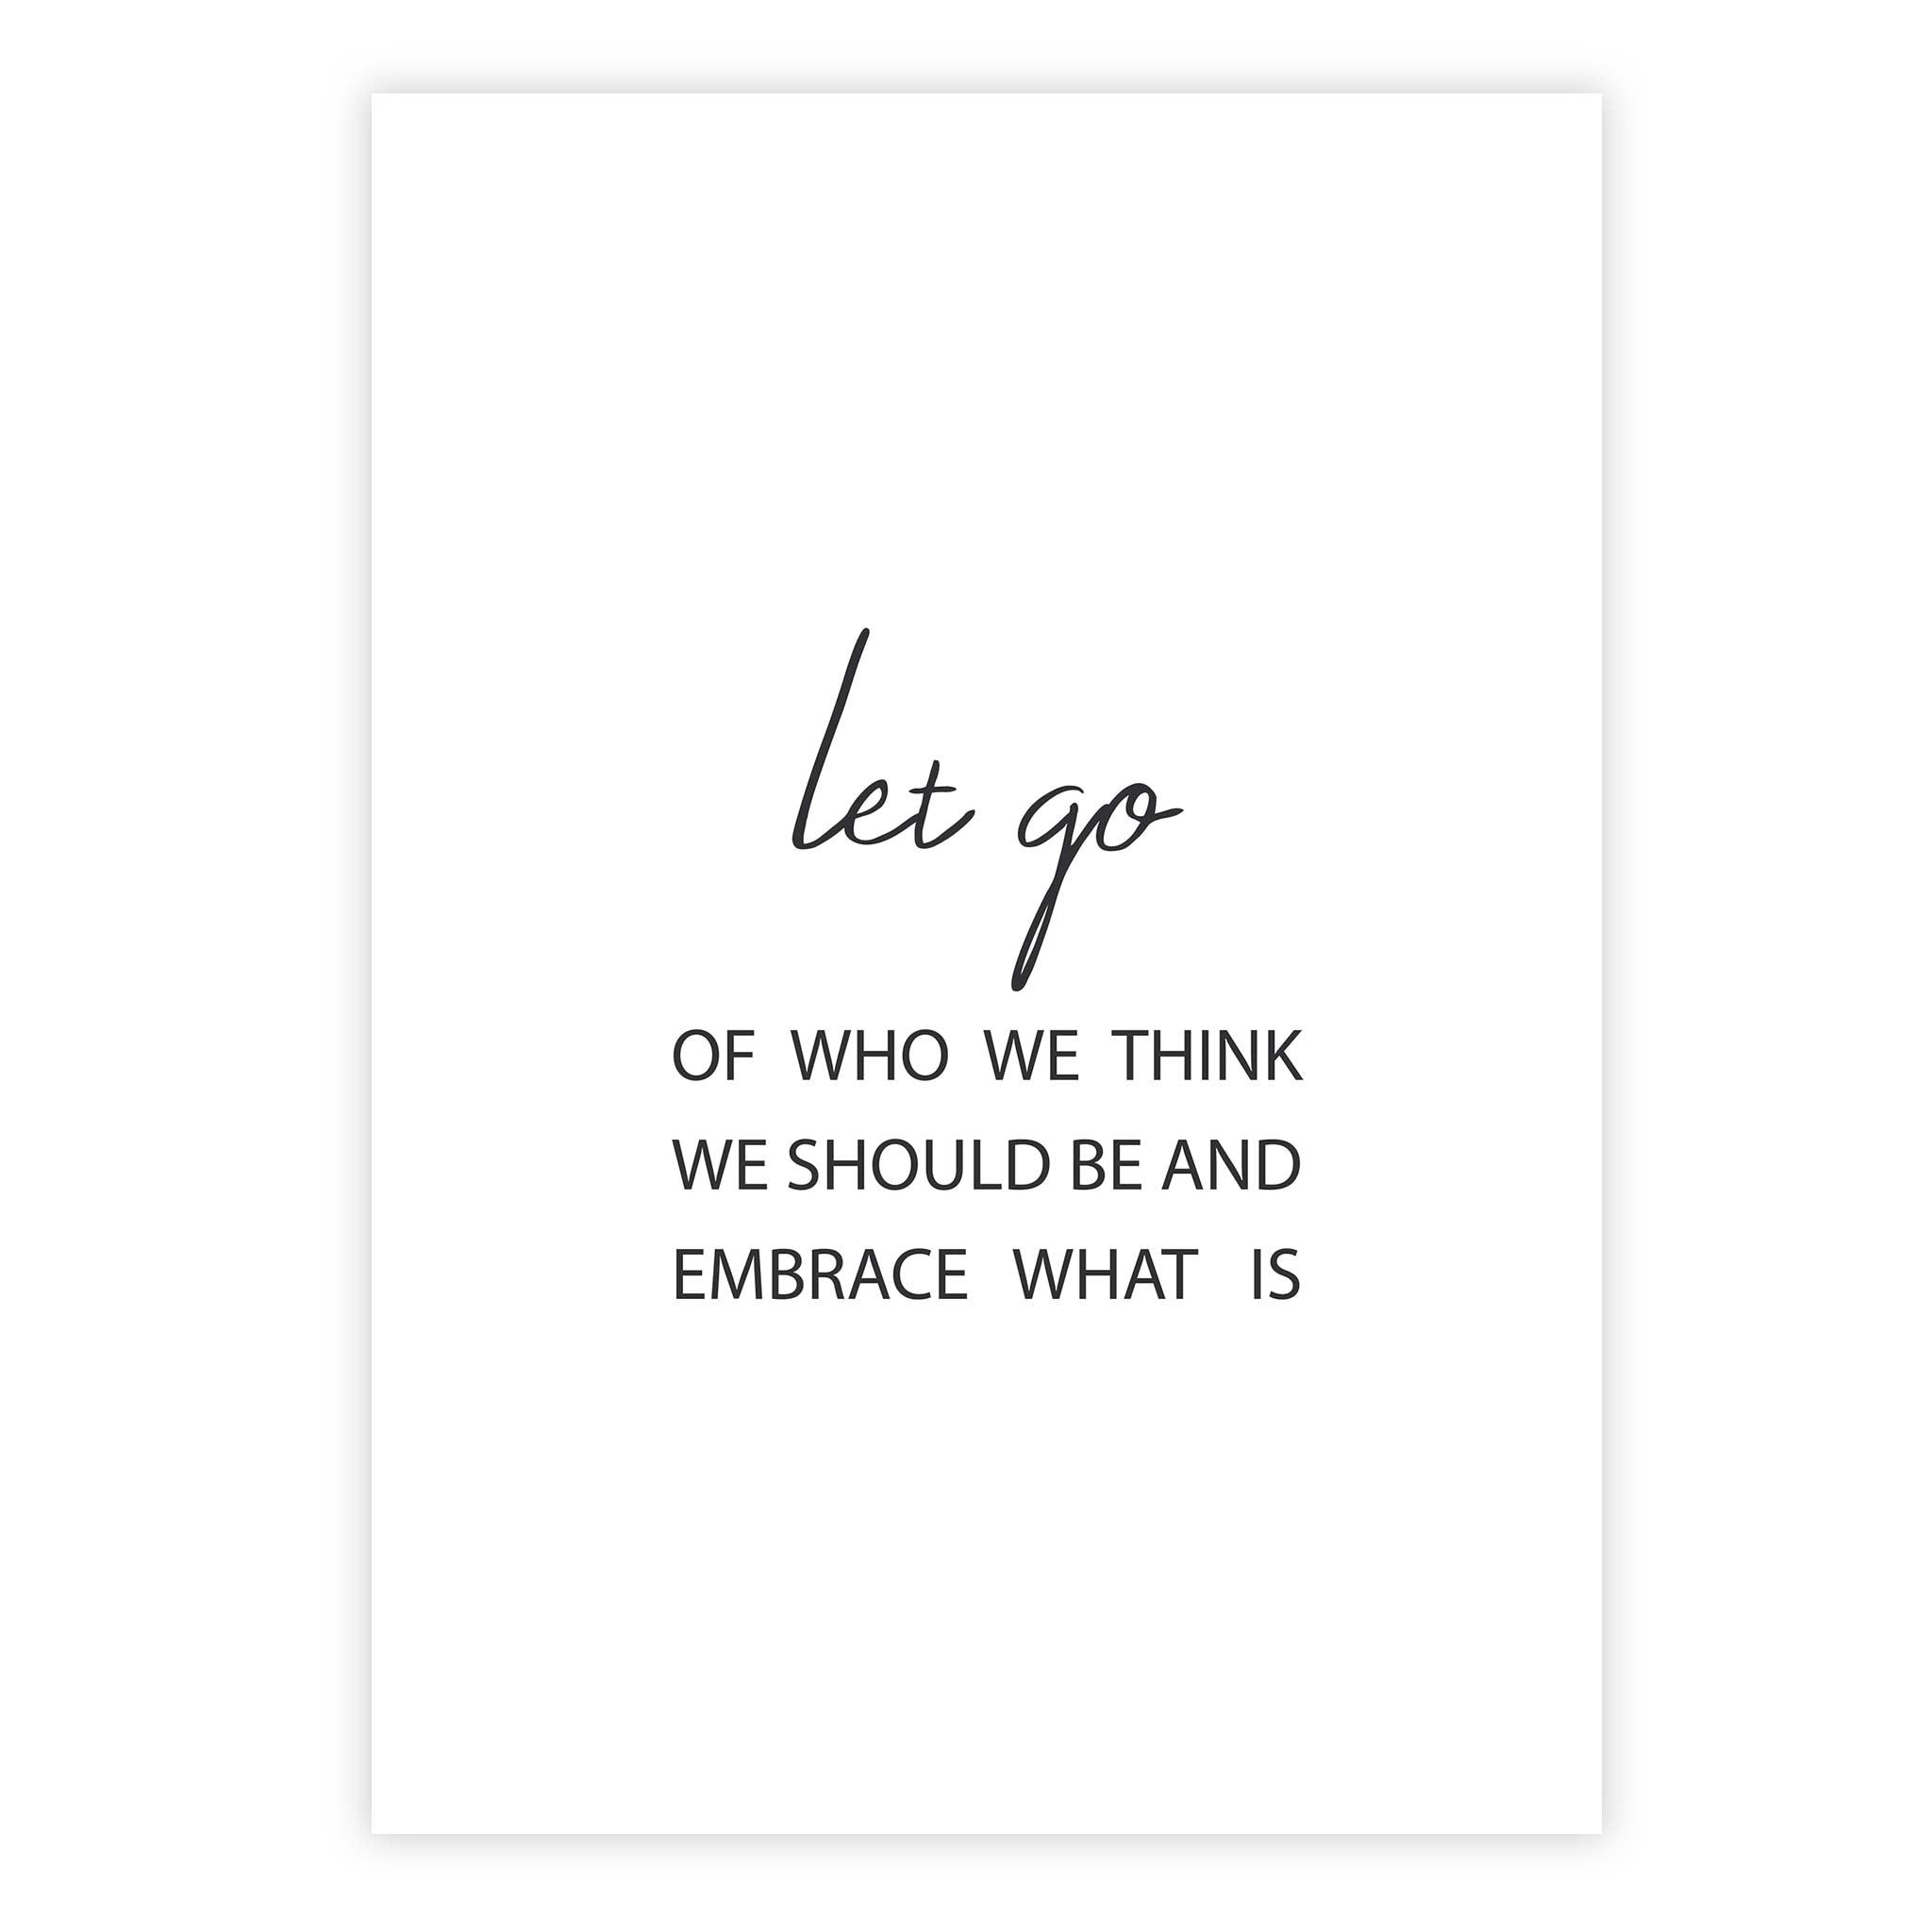 Let go of who we think we should be and embrace what is